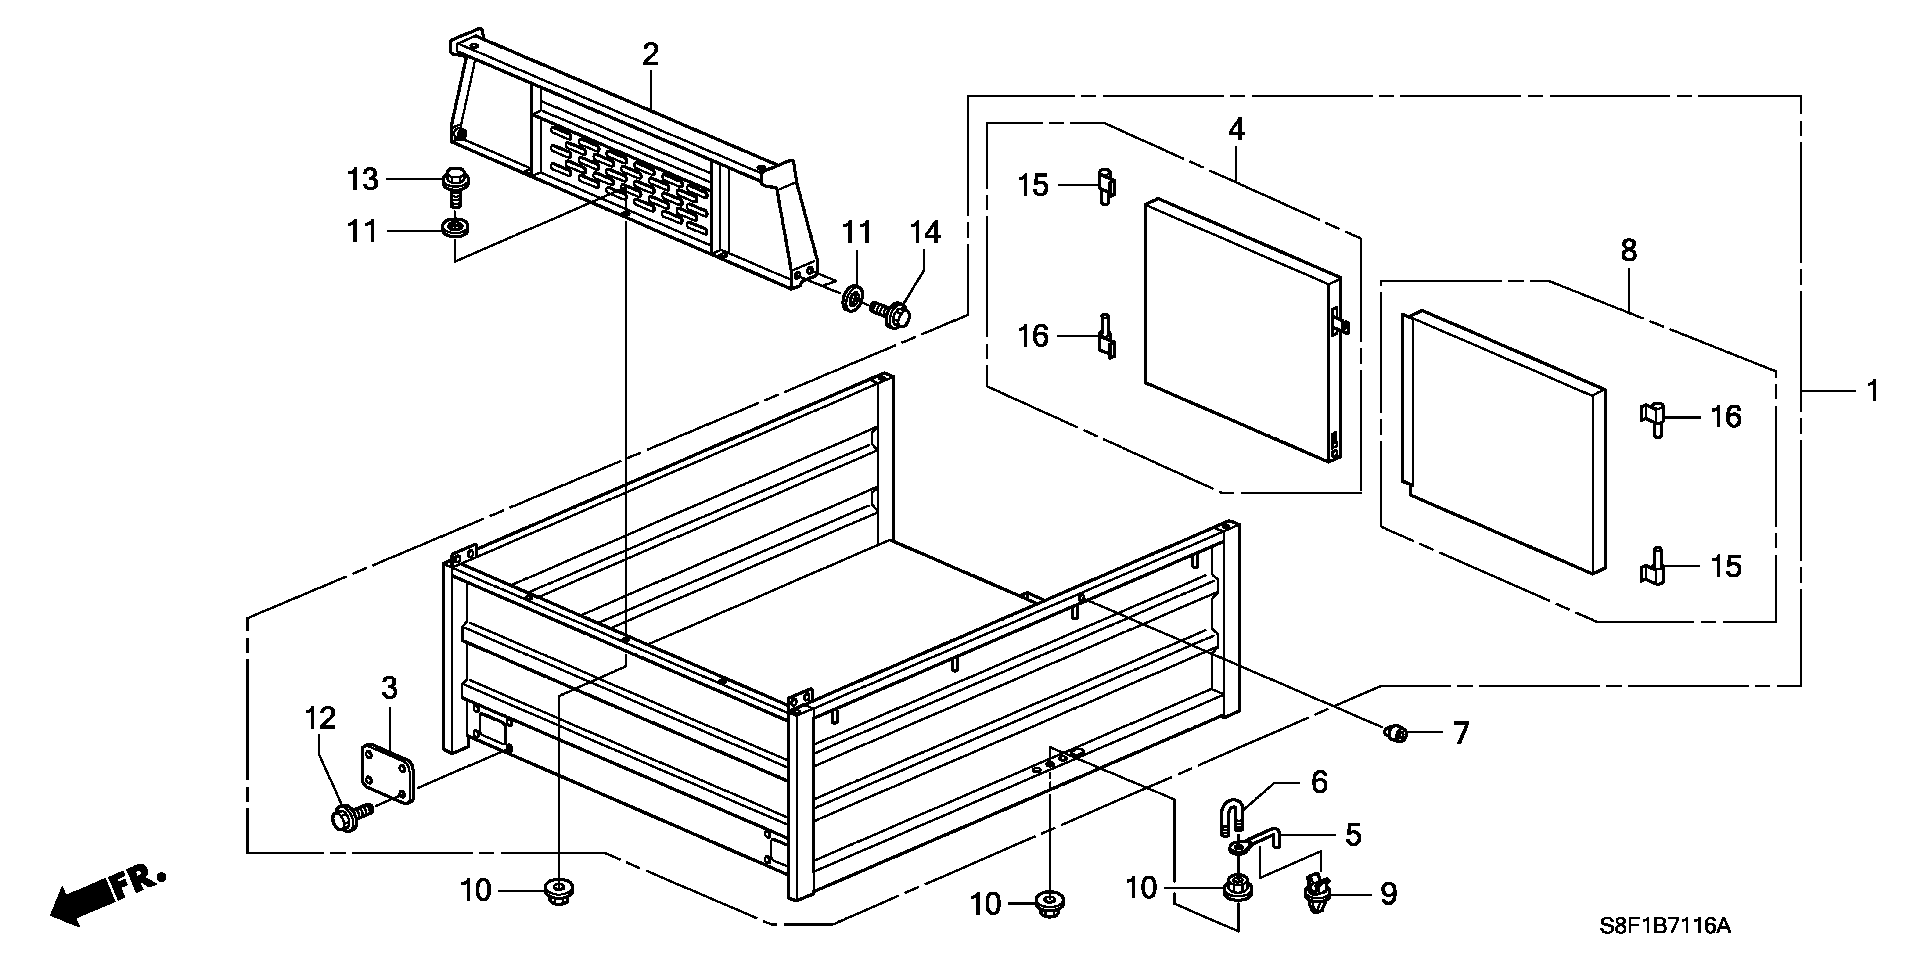 REAR BODY/ GATE (  CLEANING ) (2)